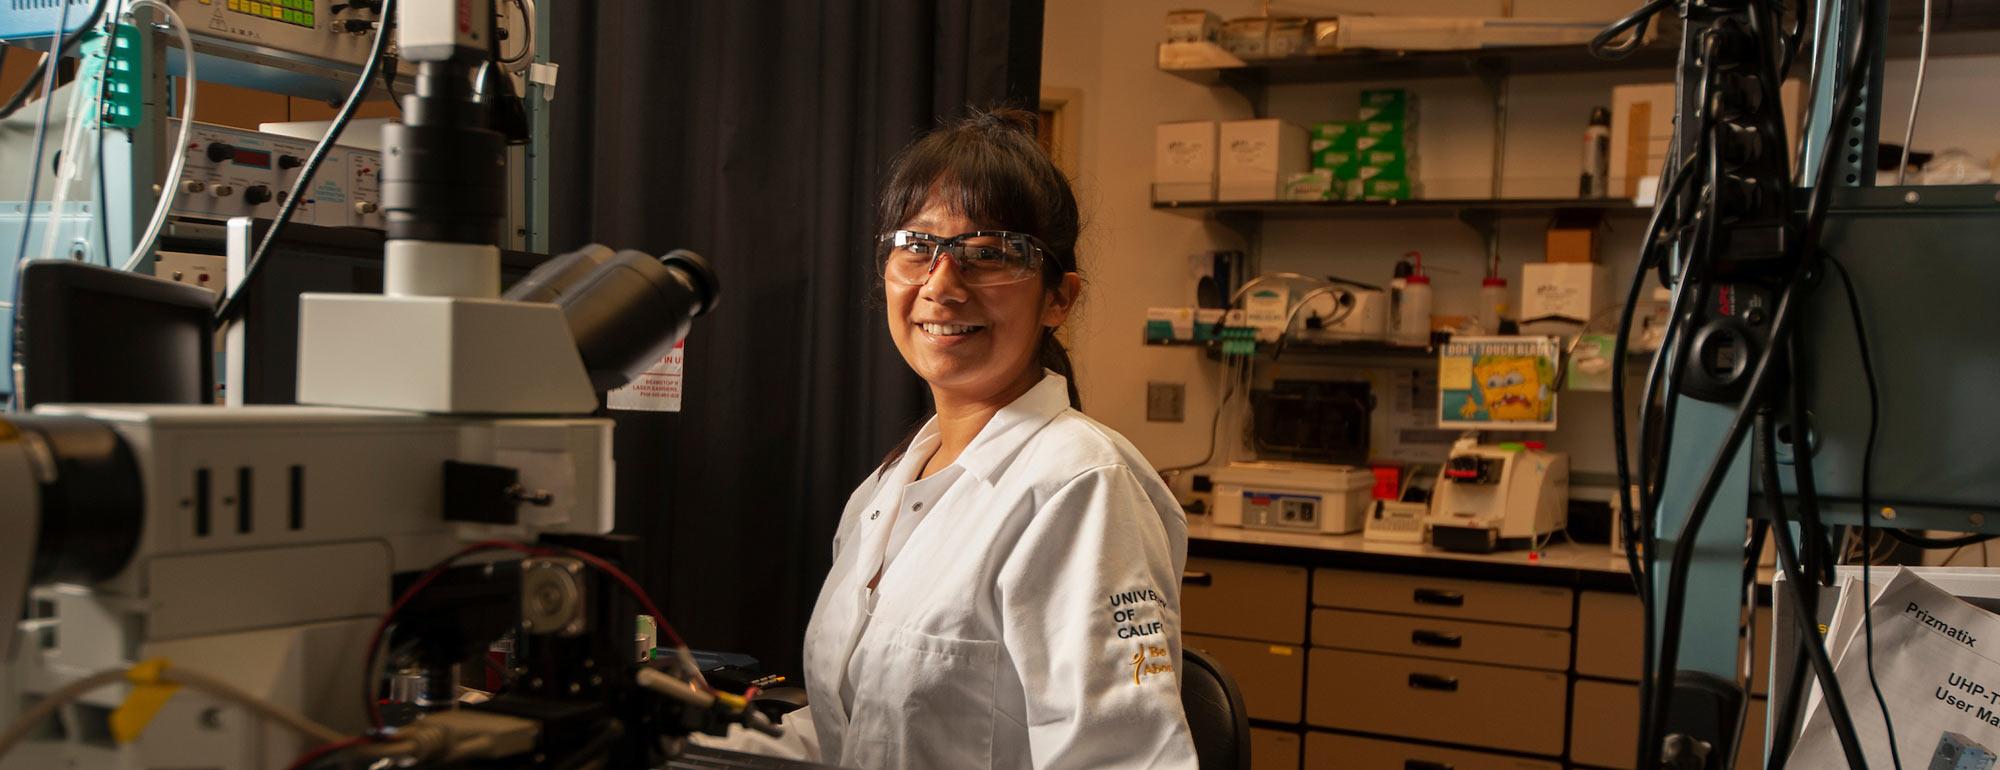 A female researcher smiles in her lab